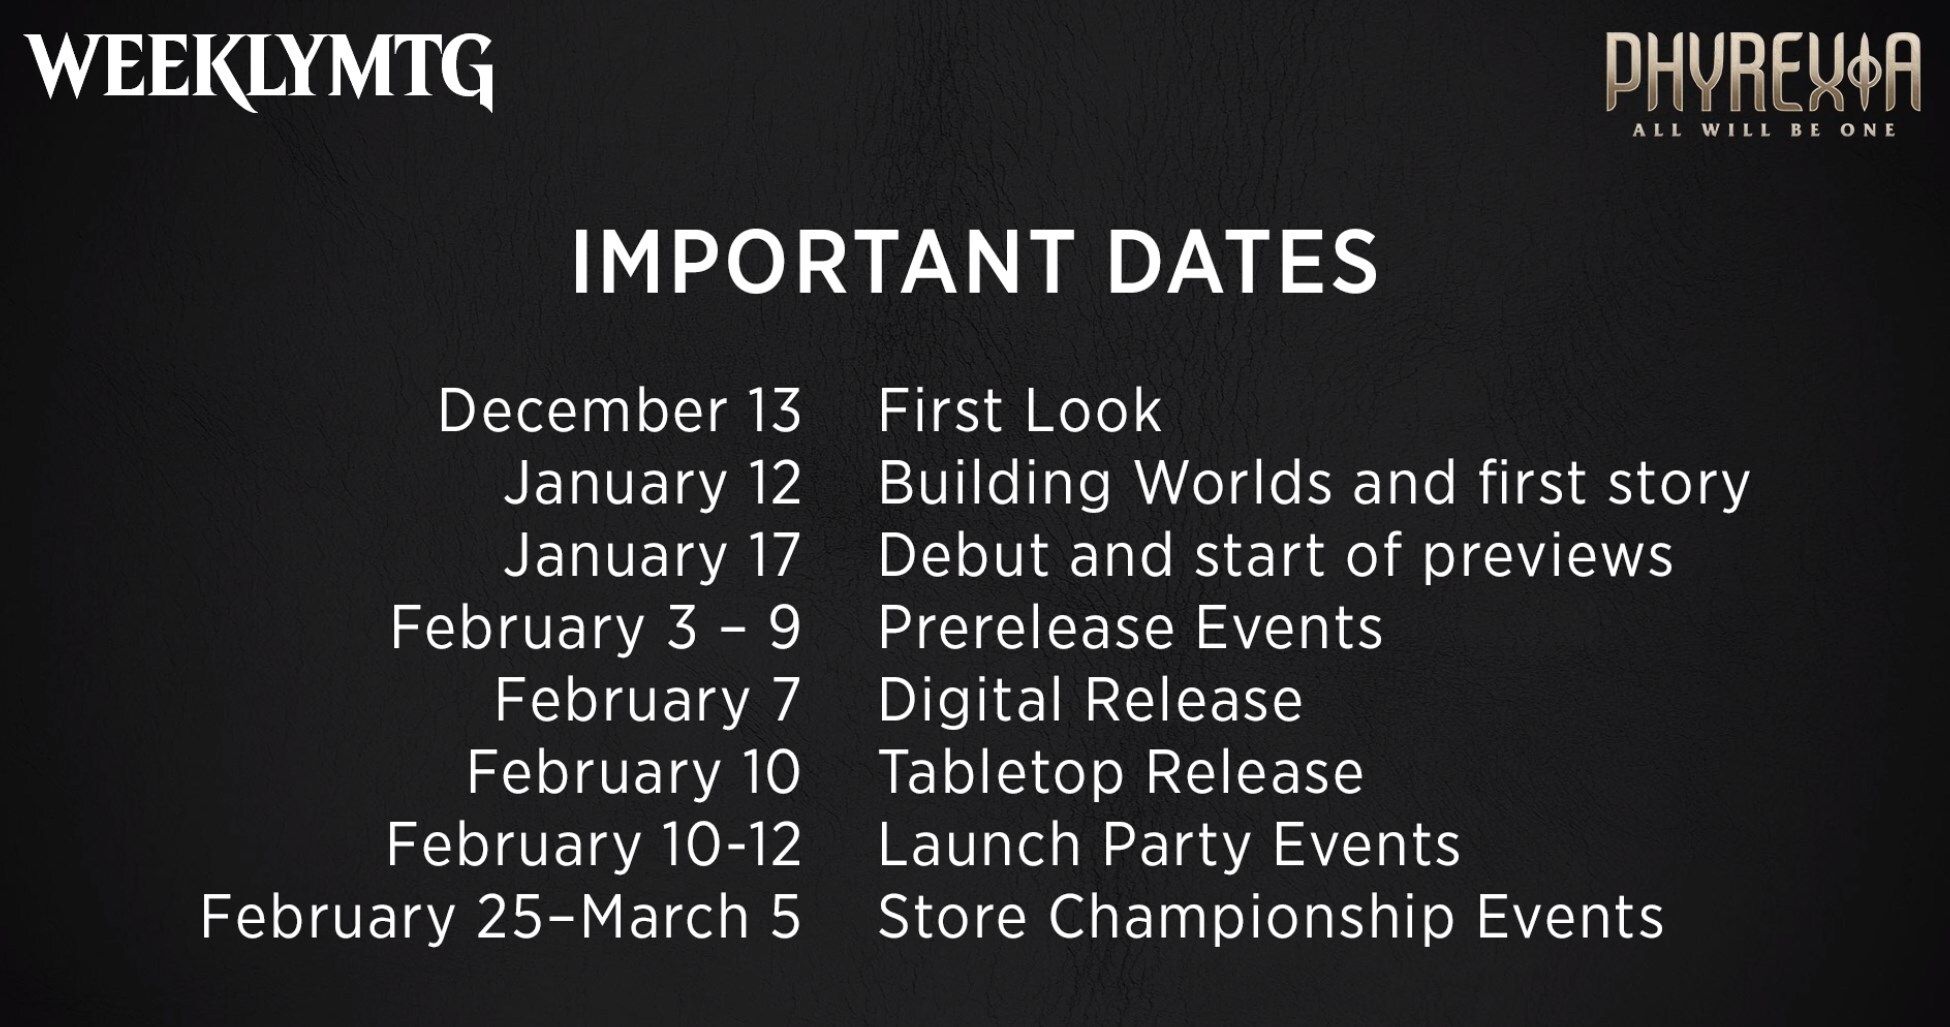 Magic Phyrexia Everything will be a schedule